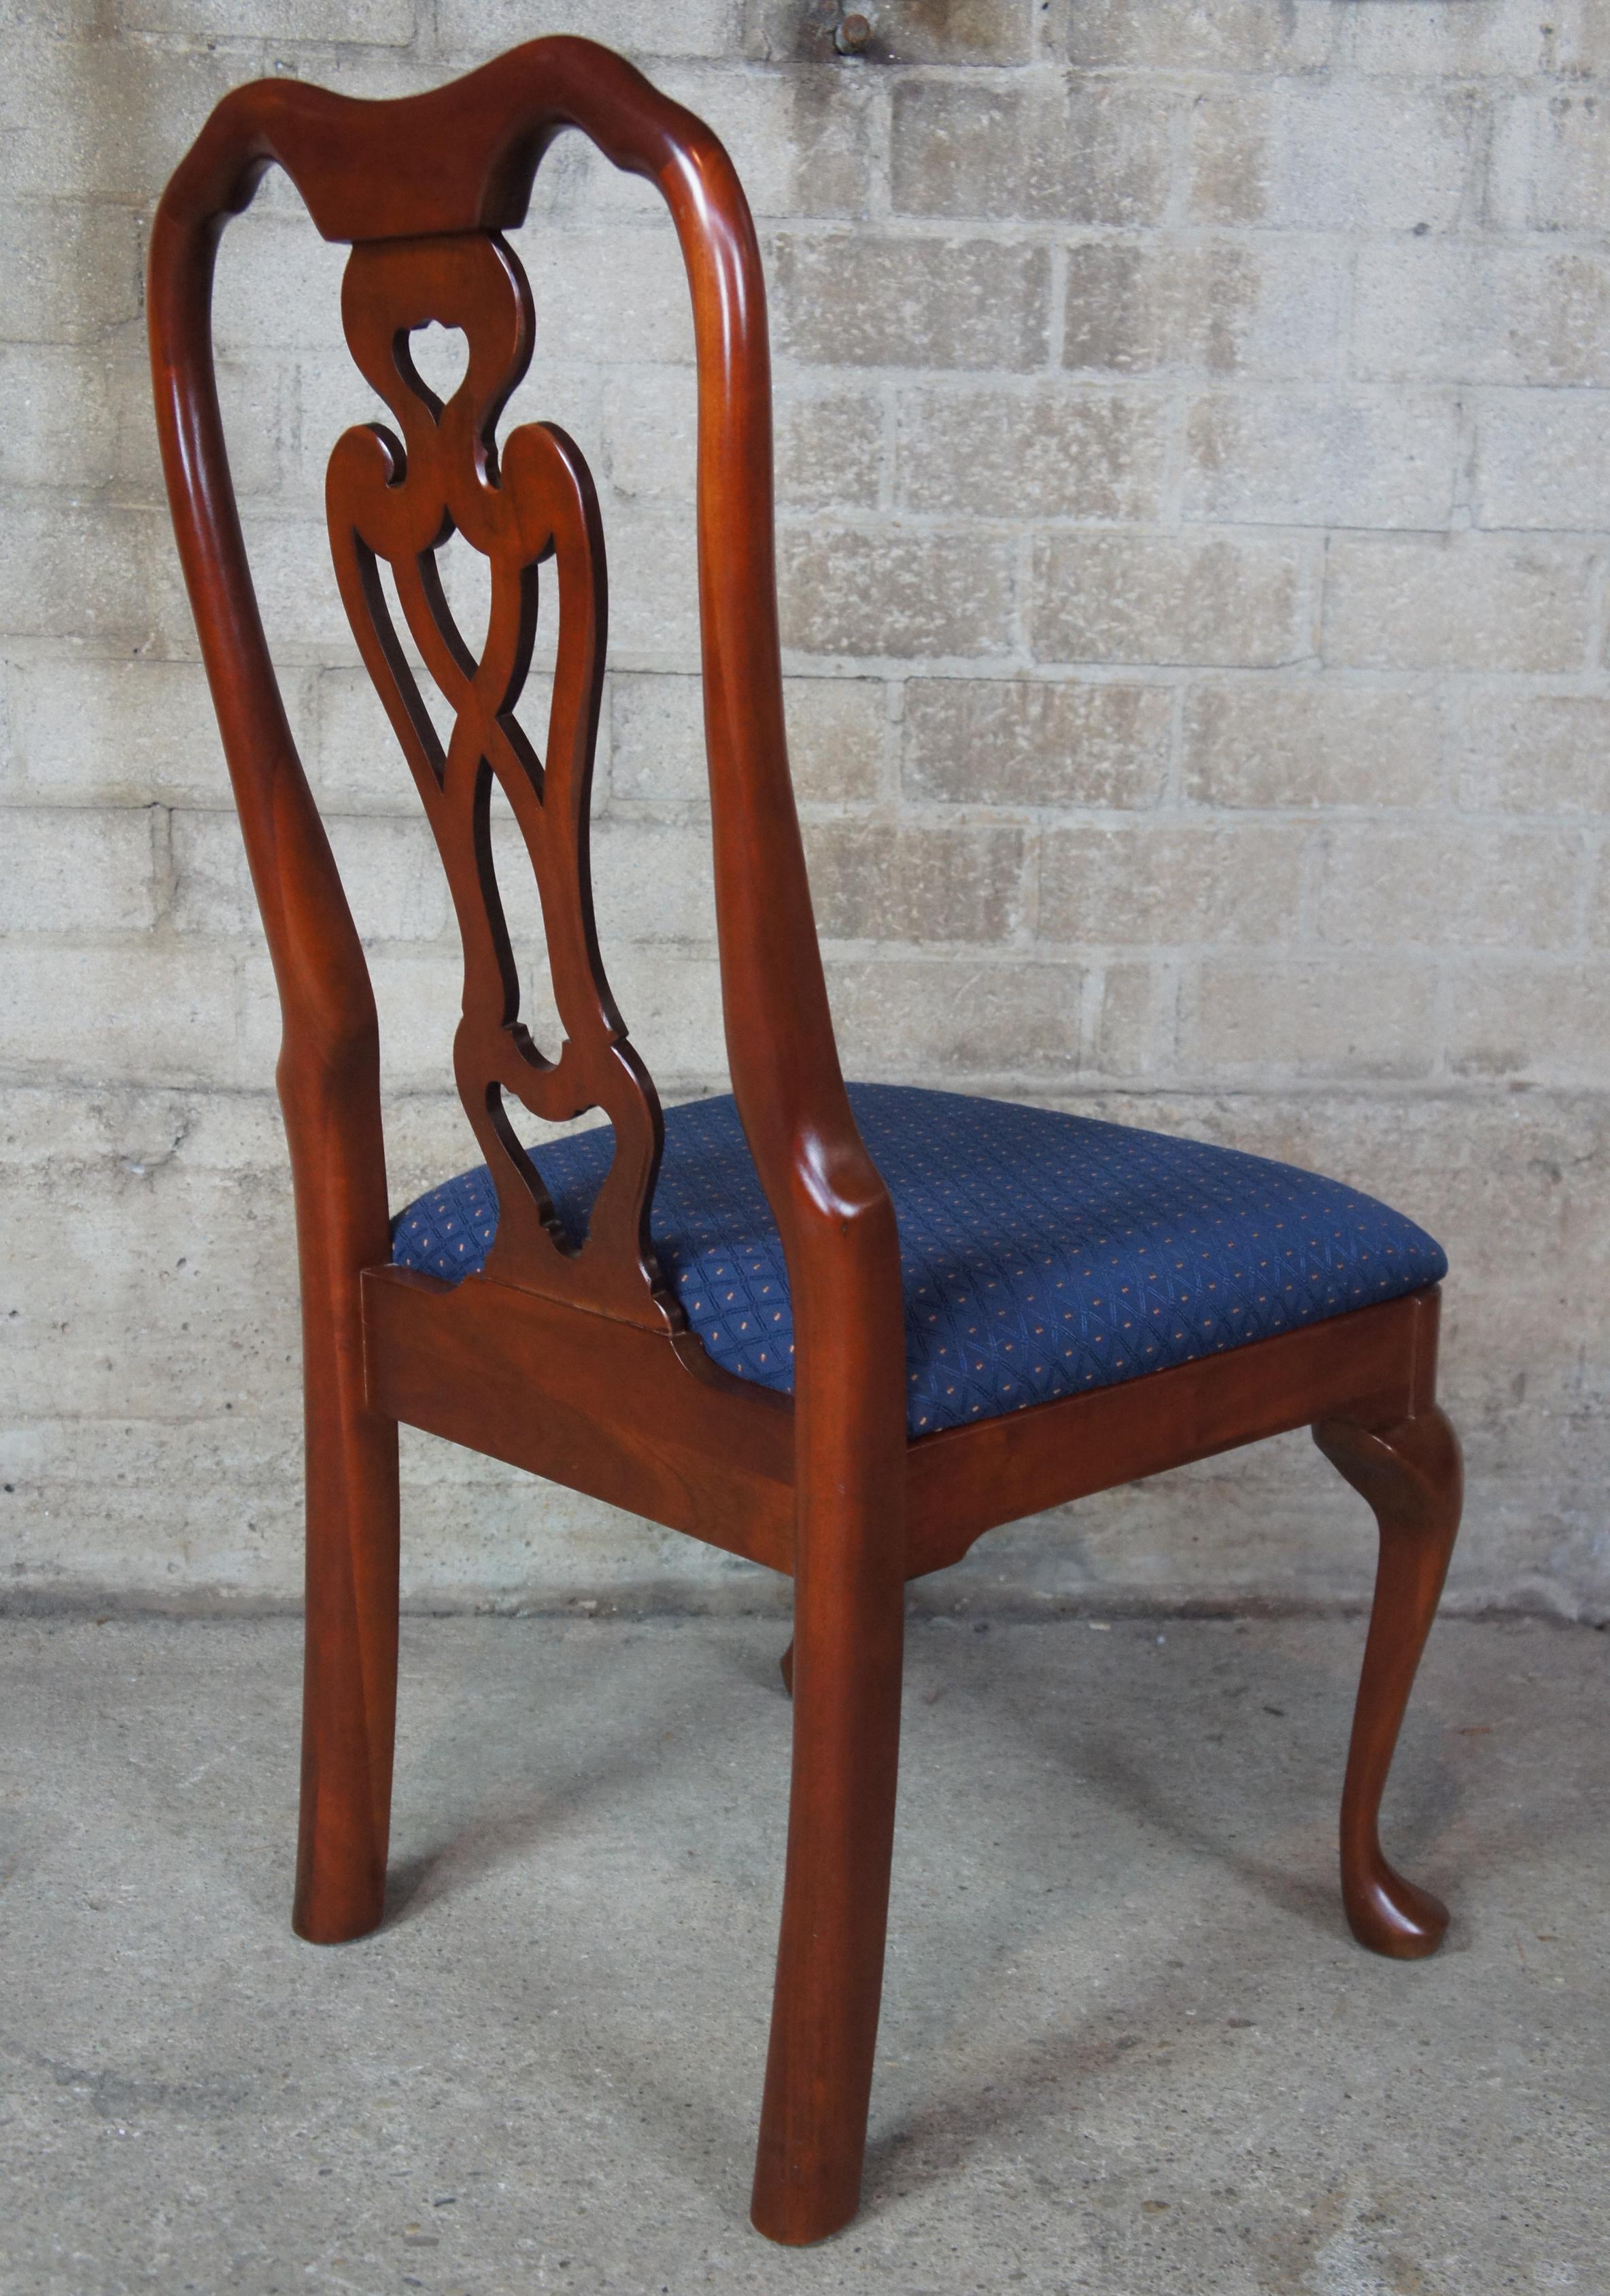 Pennsylvania House Queen Anne Solid Cherry Dining Room Chairs Blue Set of 8 2